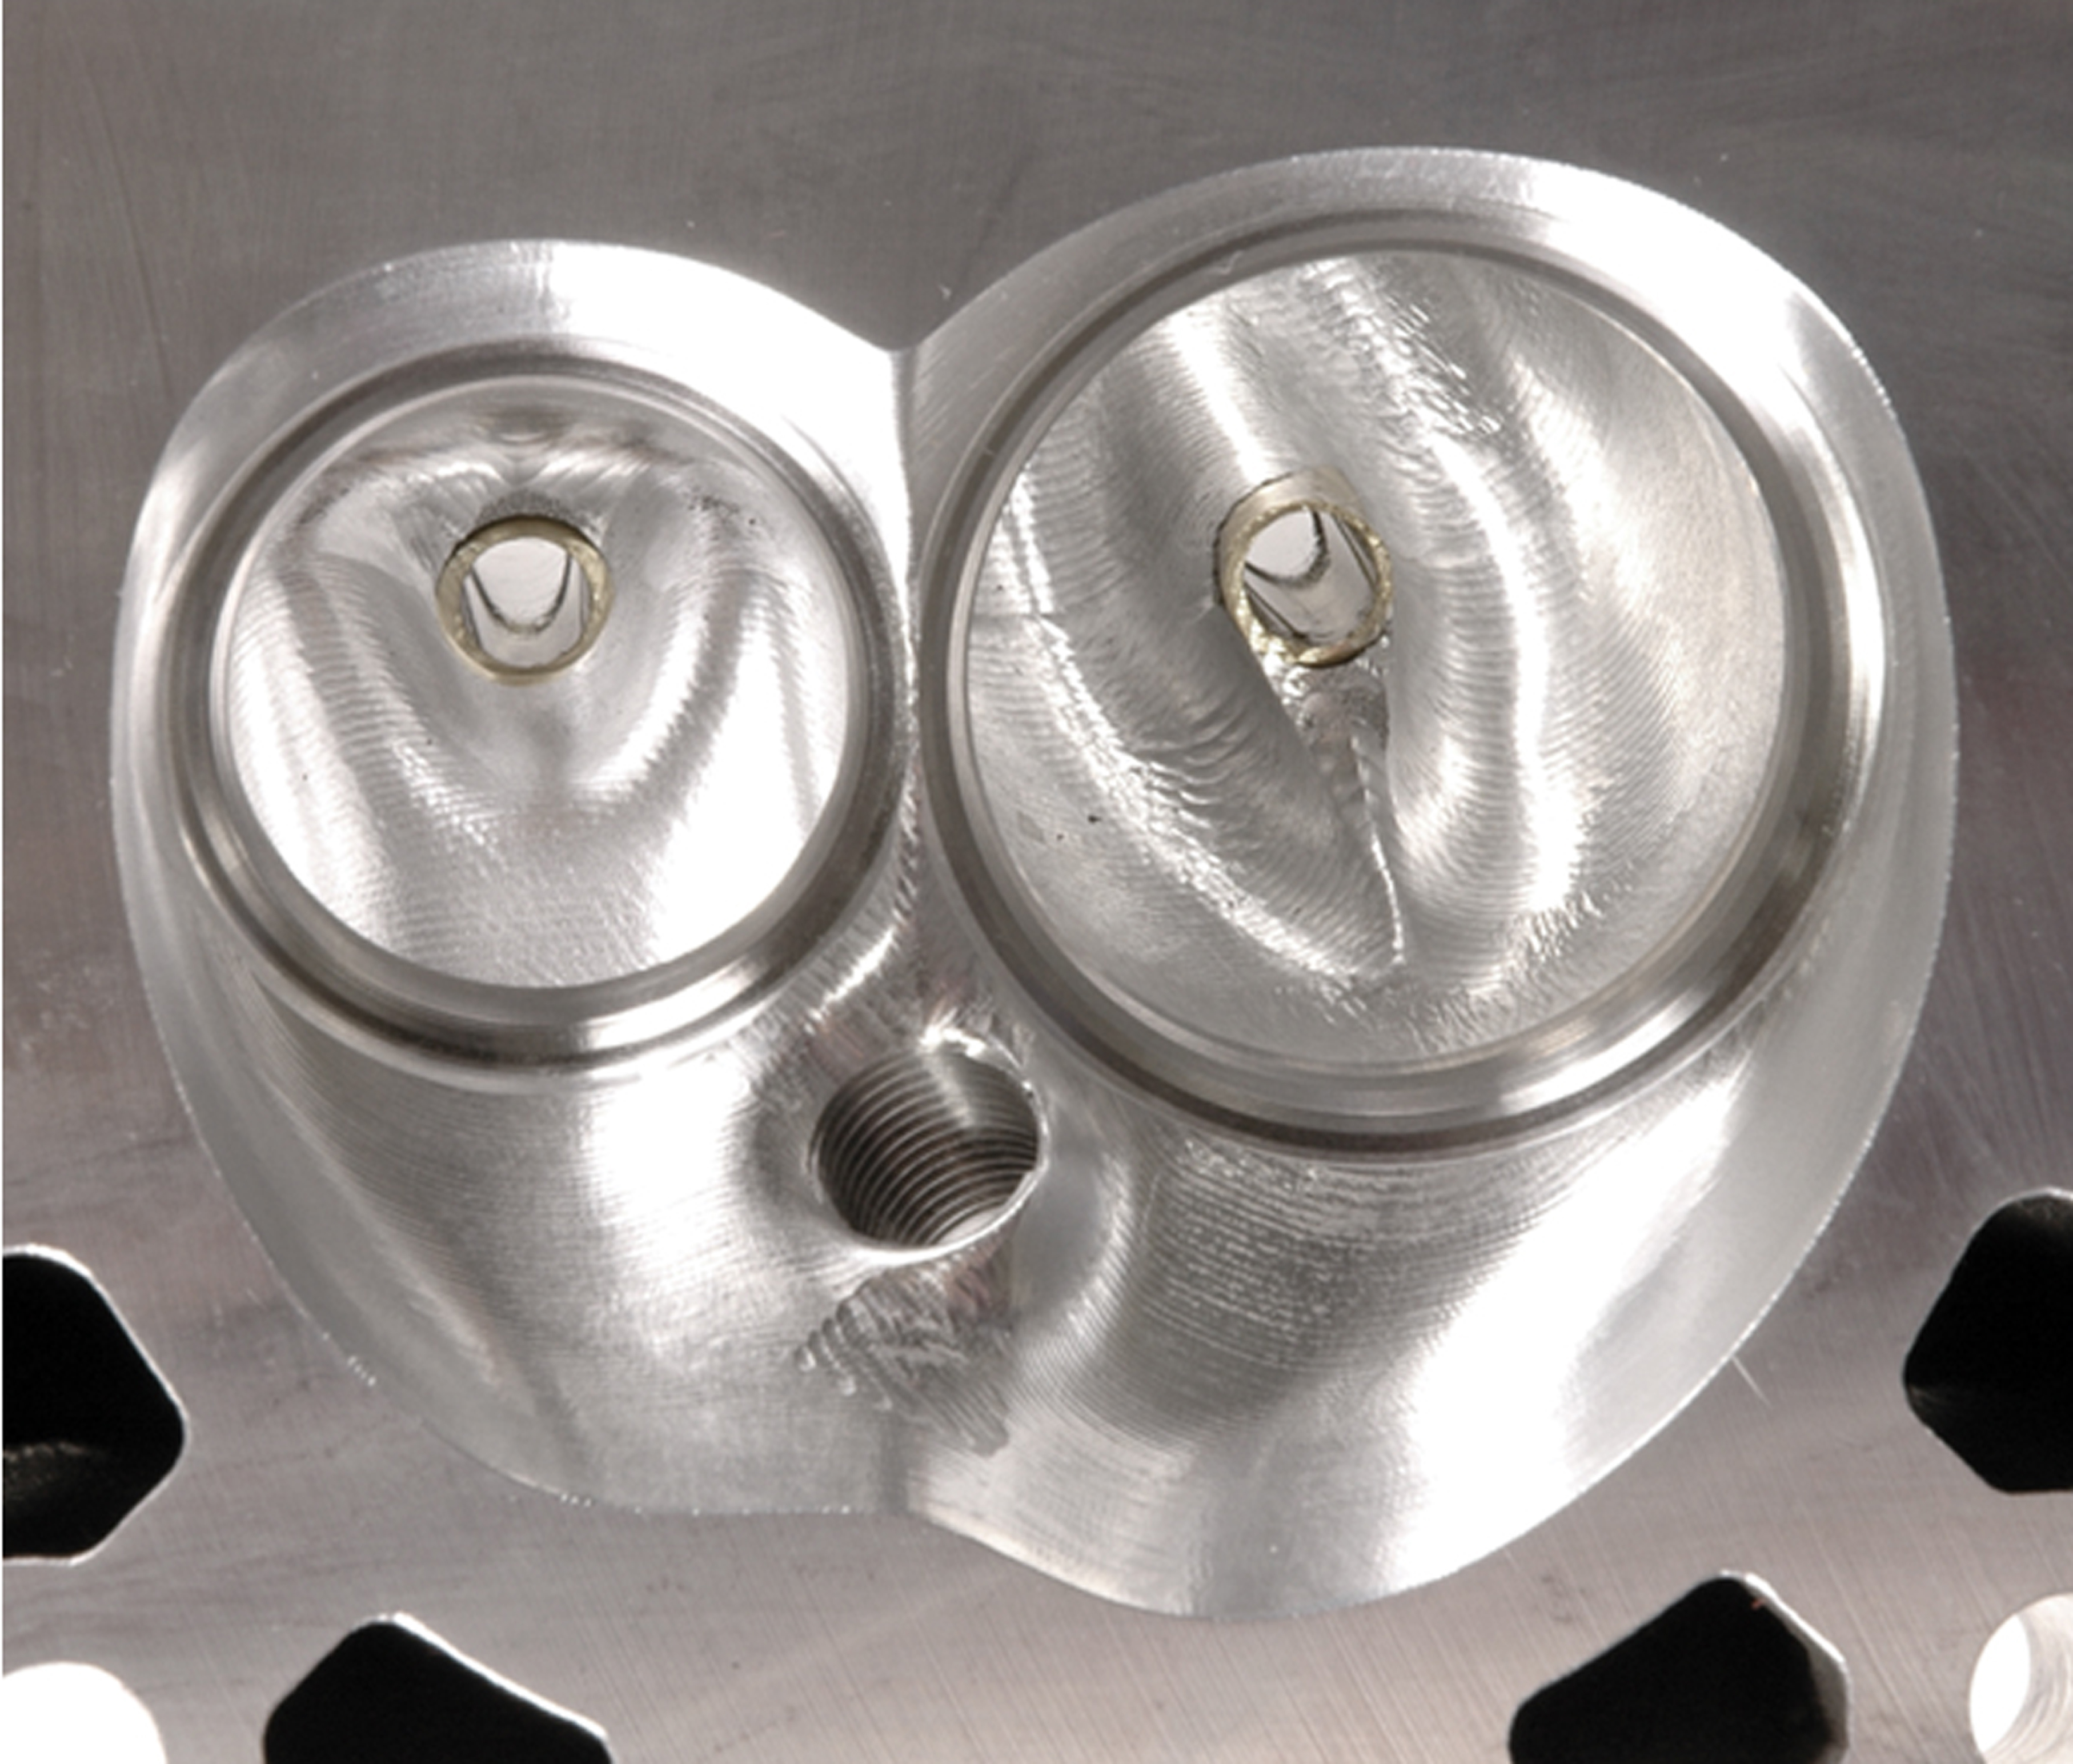 CNC porting massages the intake and exhaust ports to bring out the best in a cast port and is easily identified by the ridged, machined surface left by the cutting tool. This is a Dart 215cc Pro 1 LS cylinder head. The chamber has also been machined. 